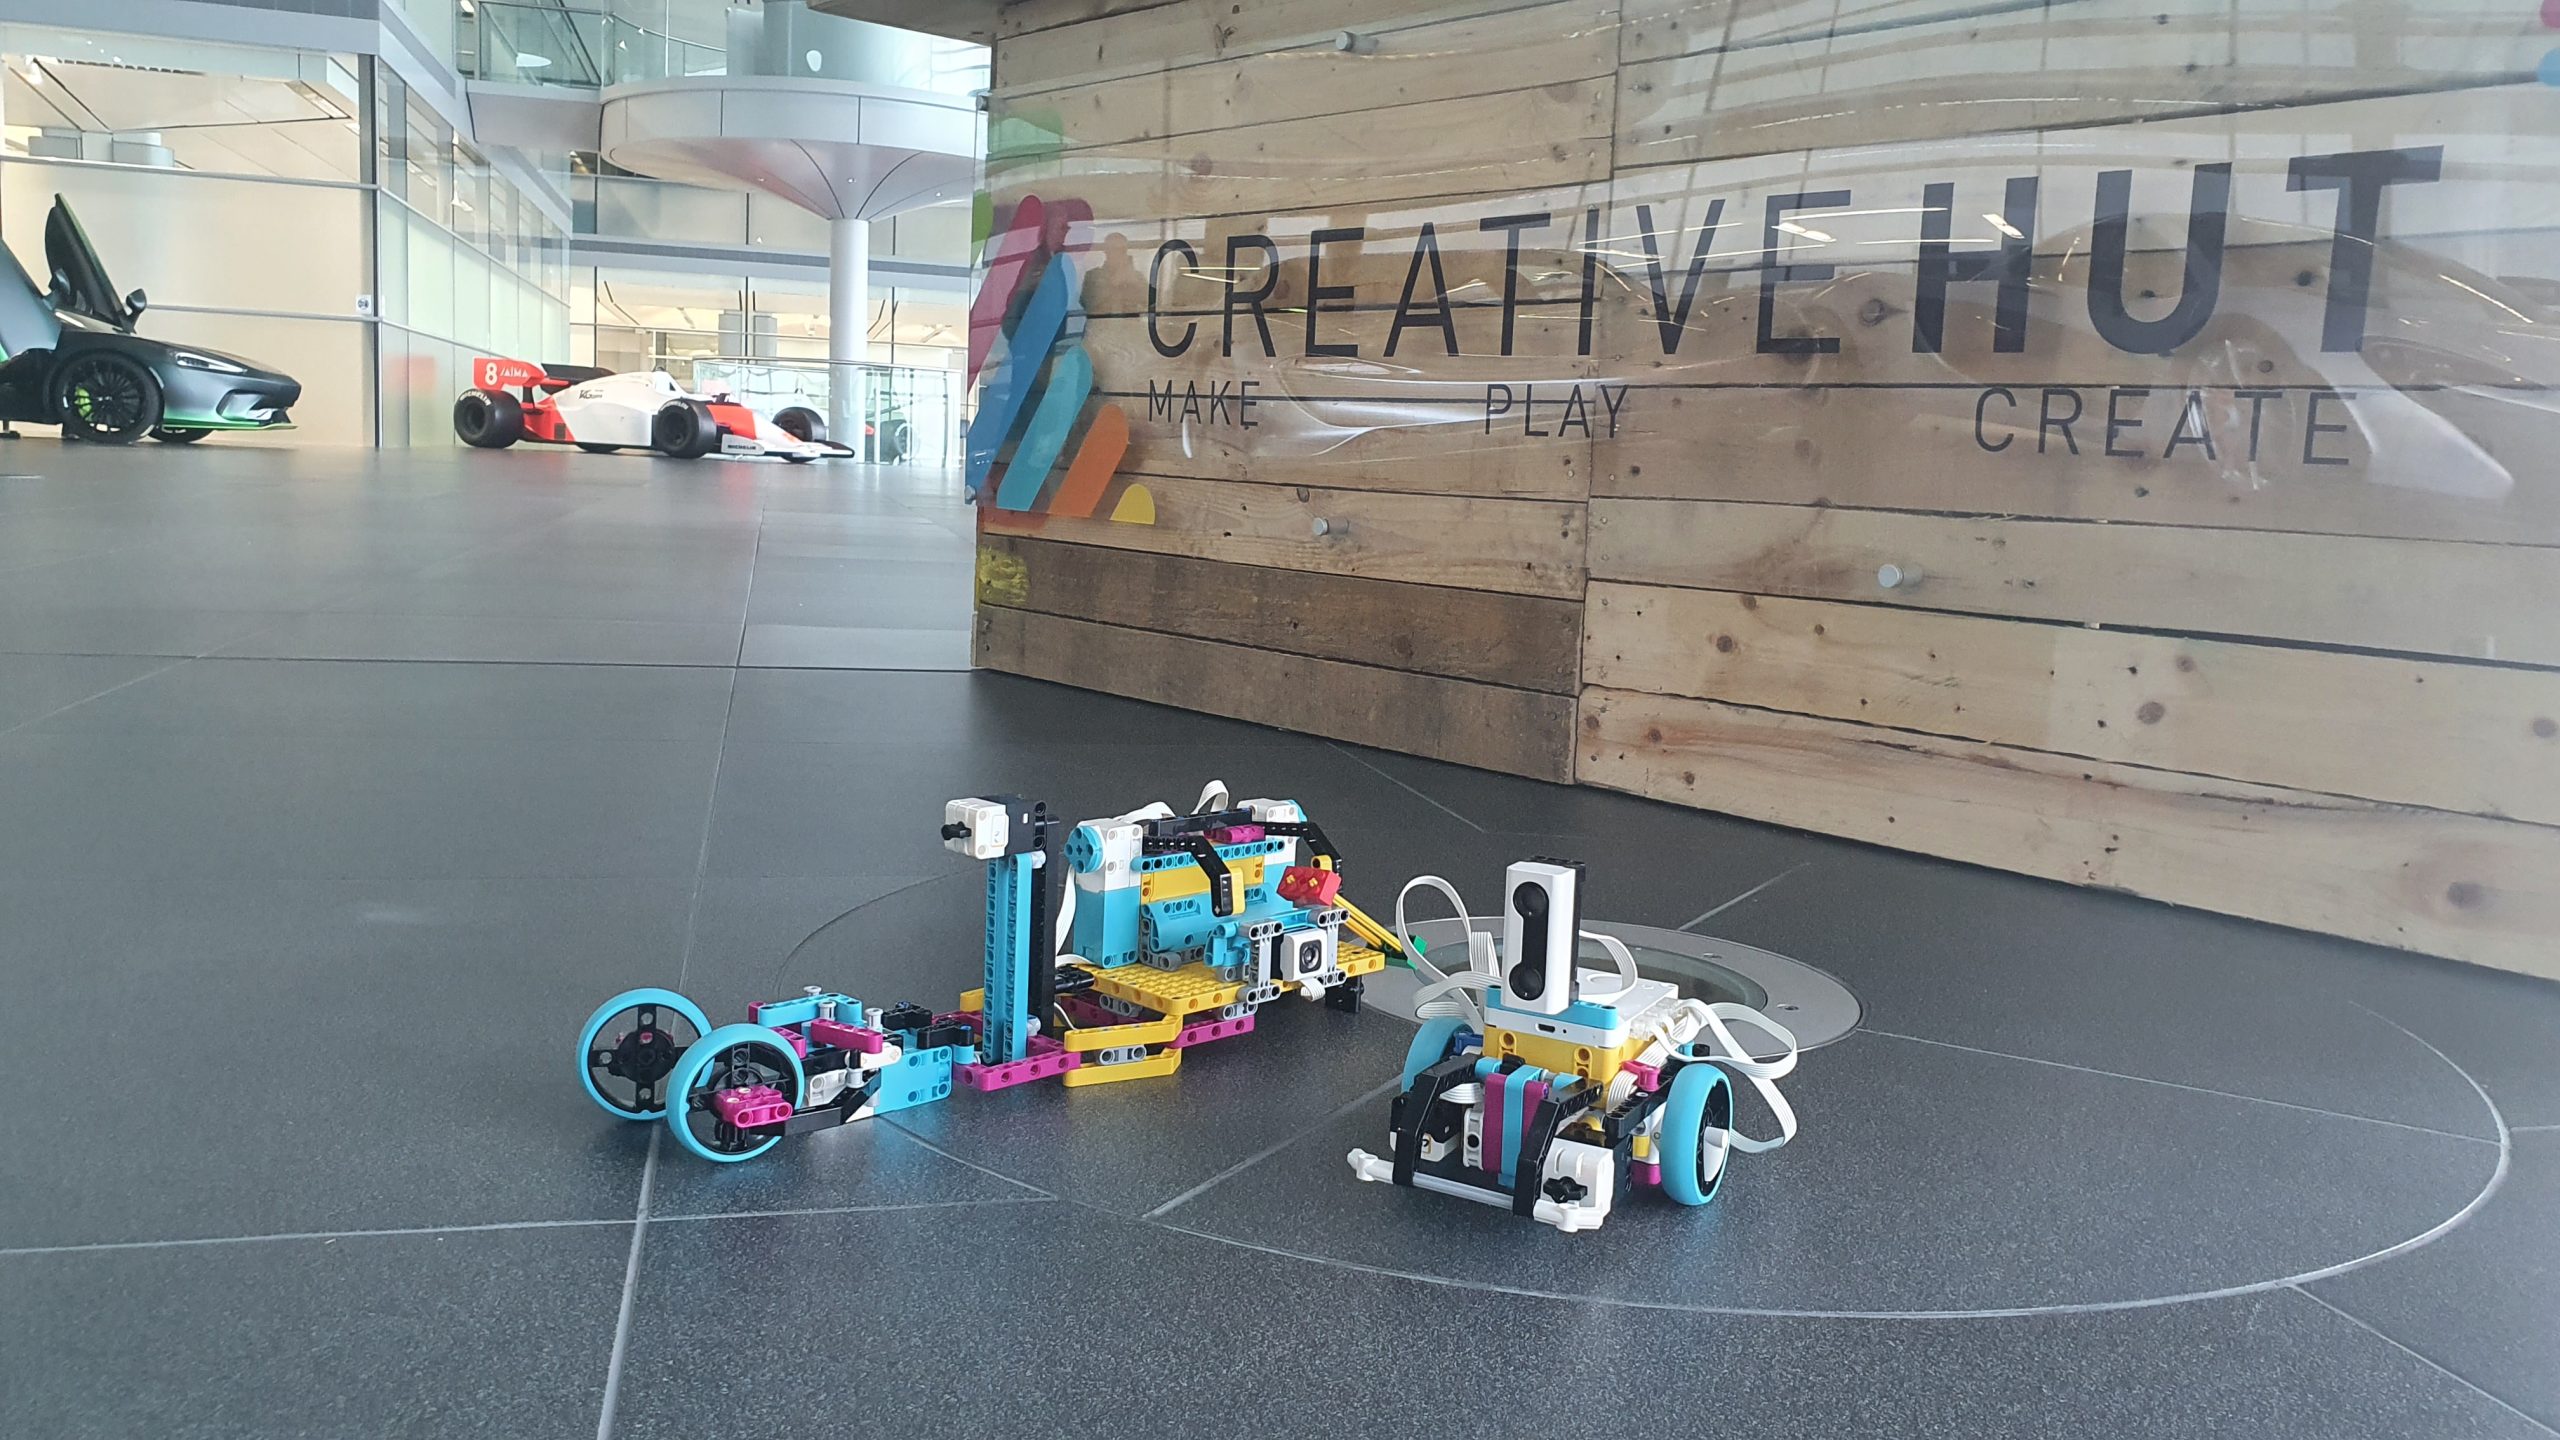 RitC host CreativeHUT for STEM Education Event at Oakwell this Saturday!